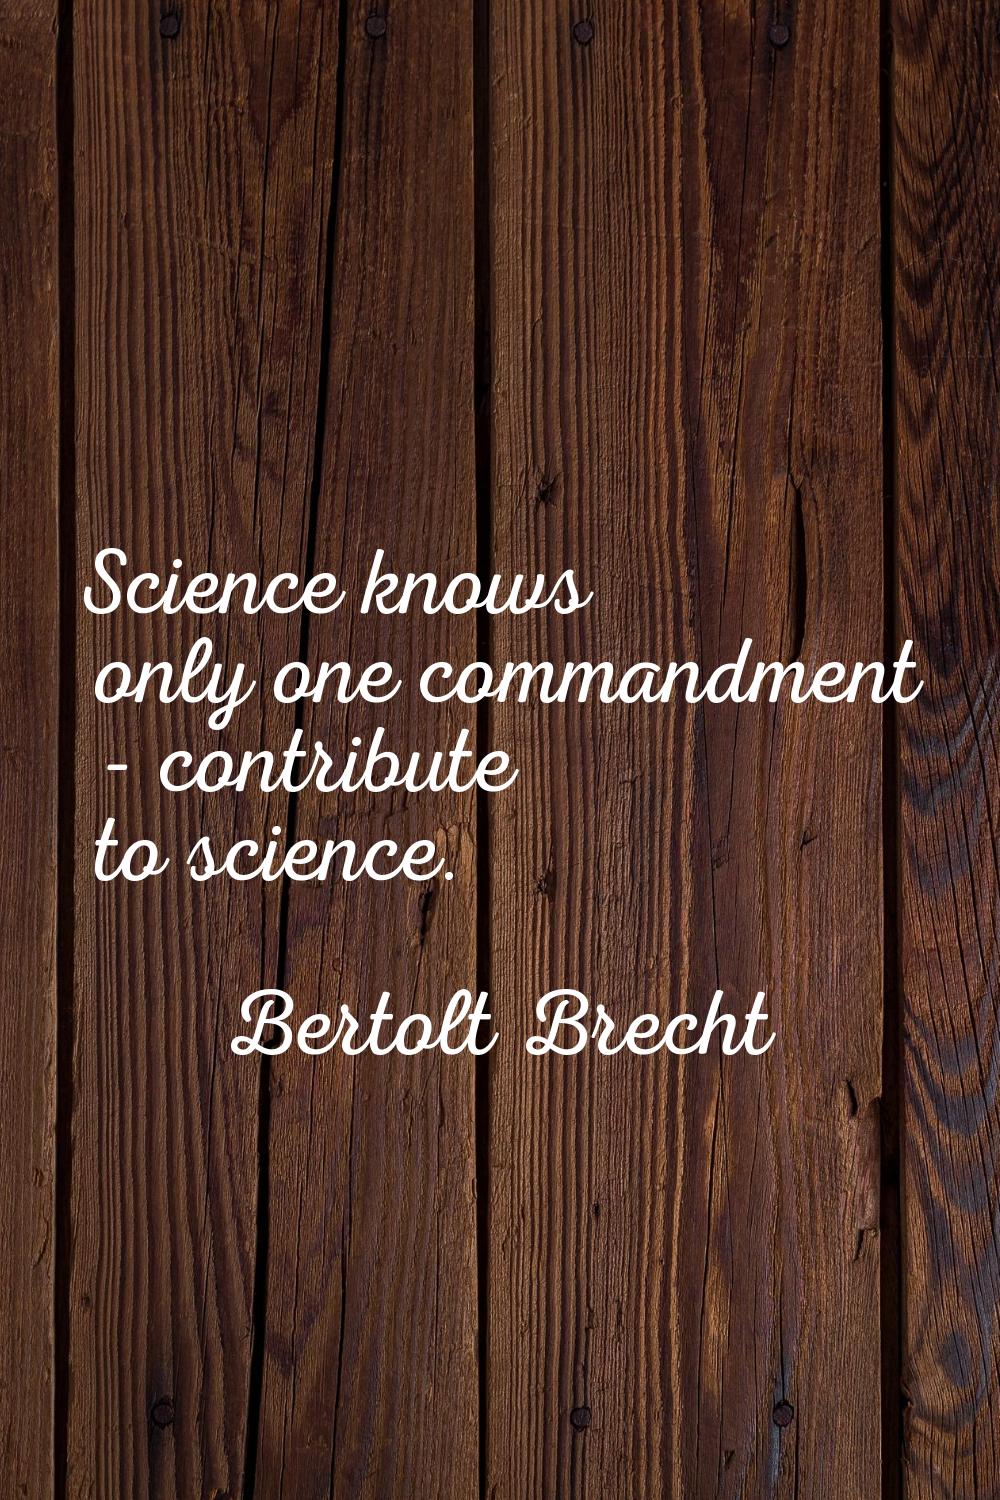 Science knows only one commandment - contribute to science.